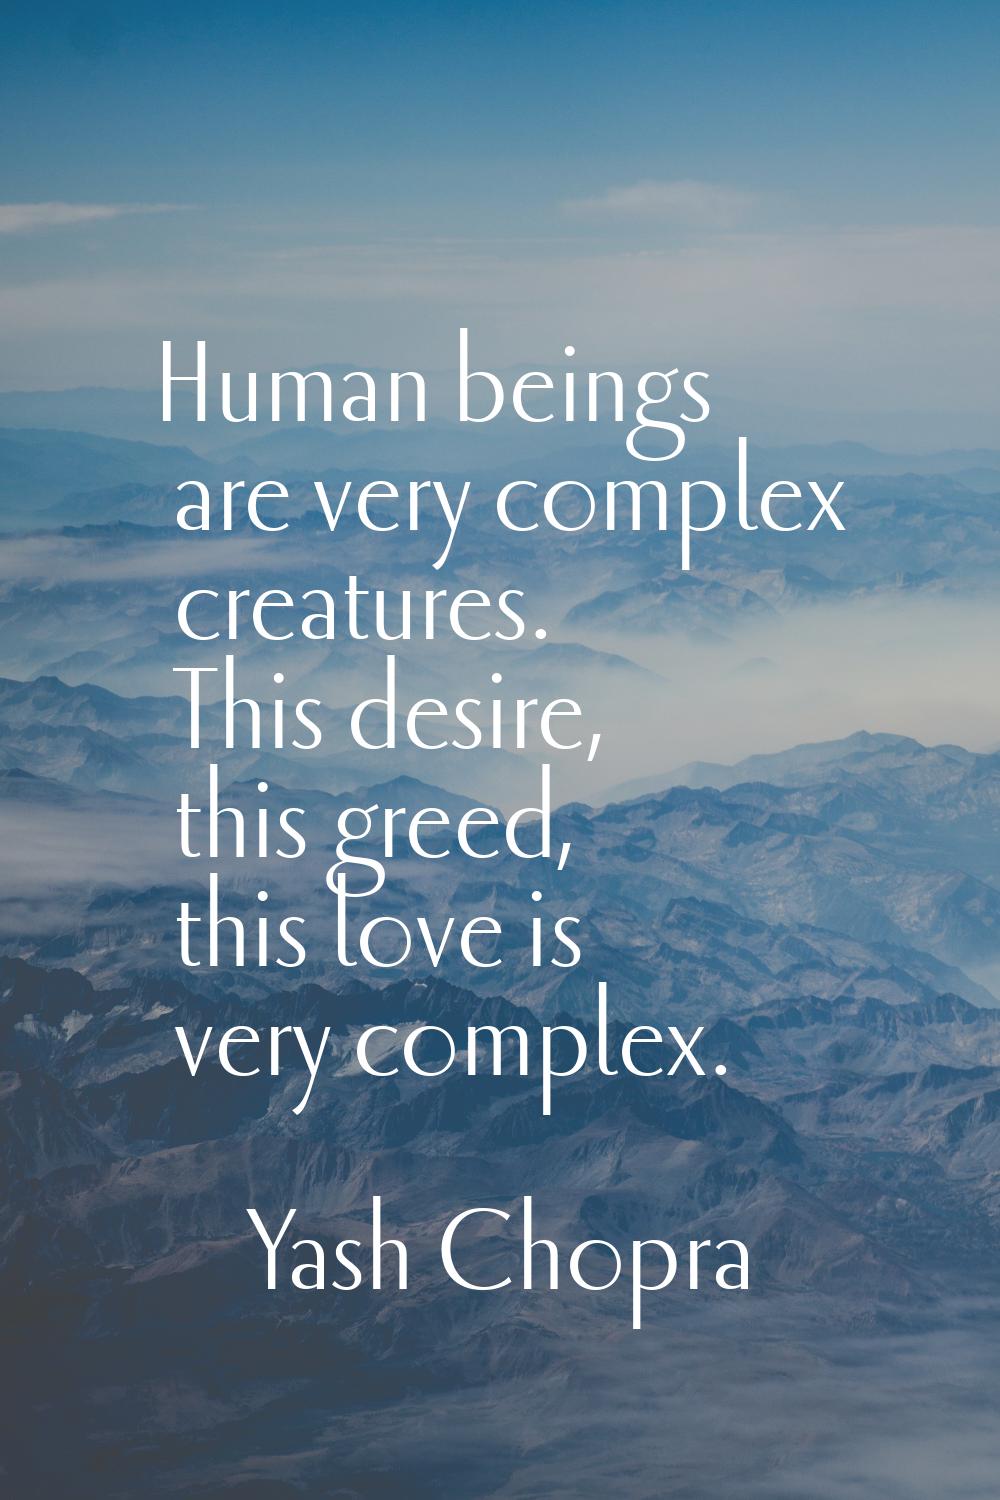 Human beings are very complex creatures. This desire, this greed, this love is very complex.